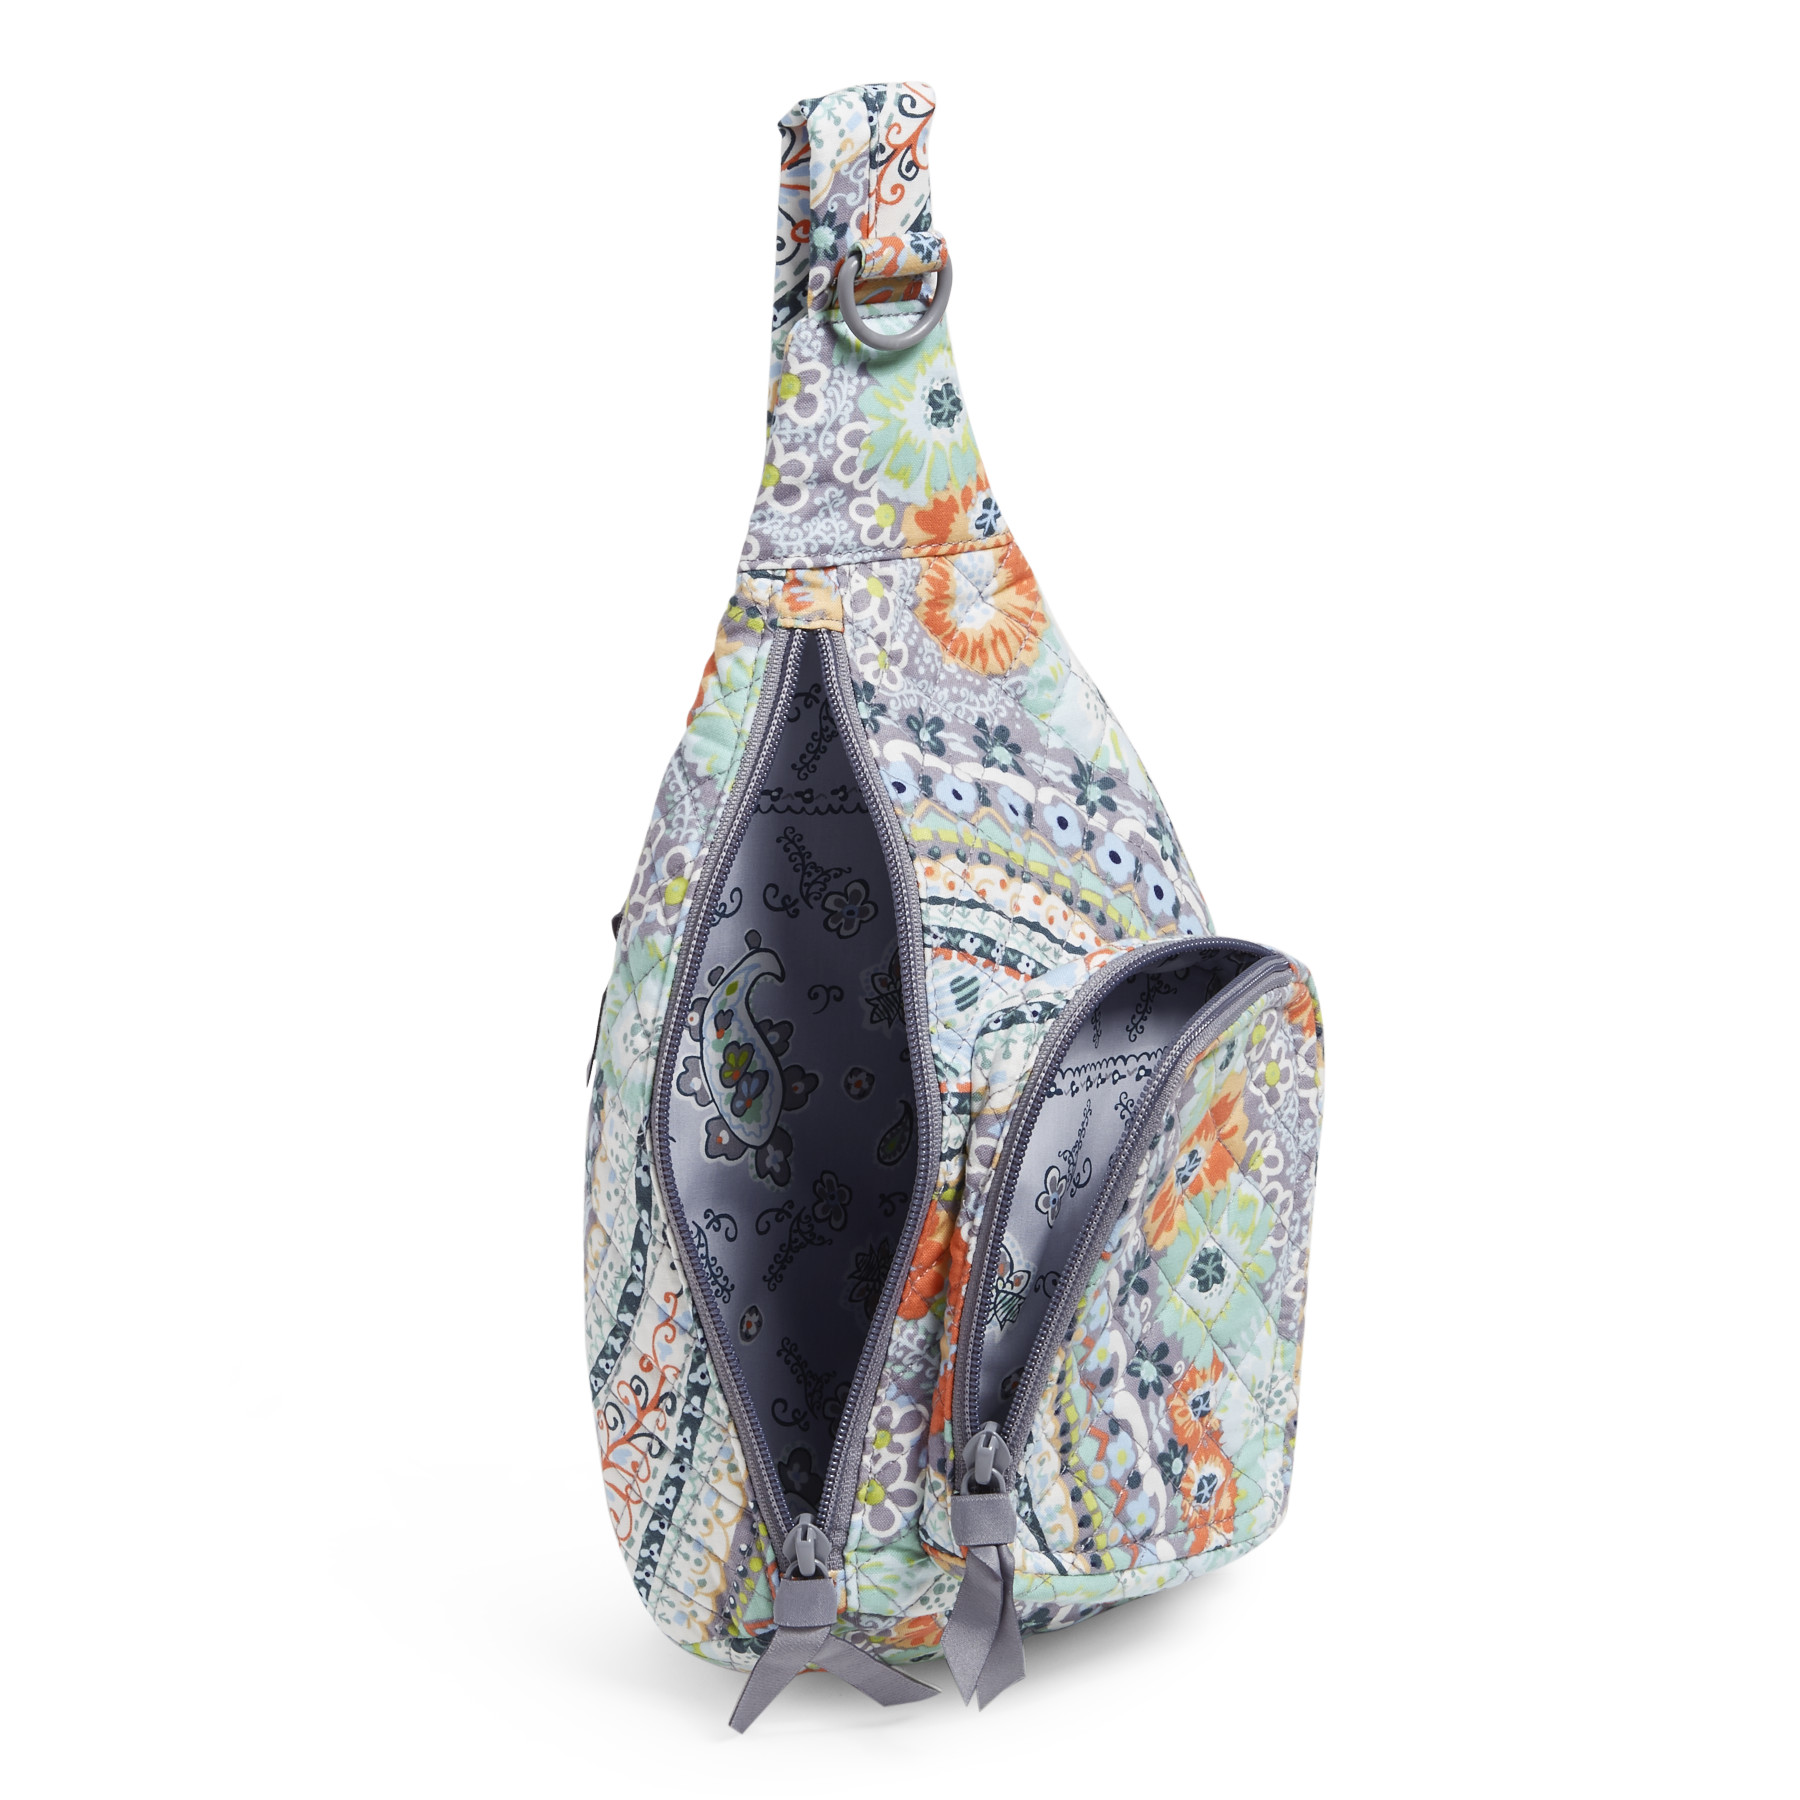 Vera Bradley Women's Recycled Cotton Mini Sling Backpack Citrus Paisley - image 3 of 8